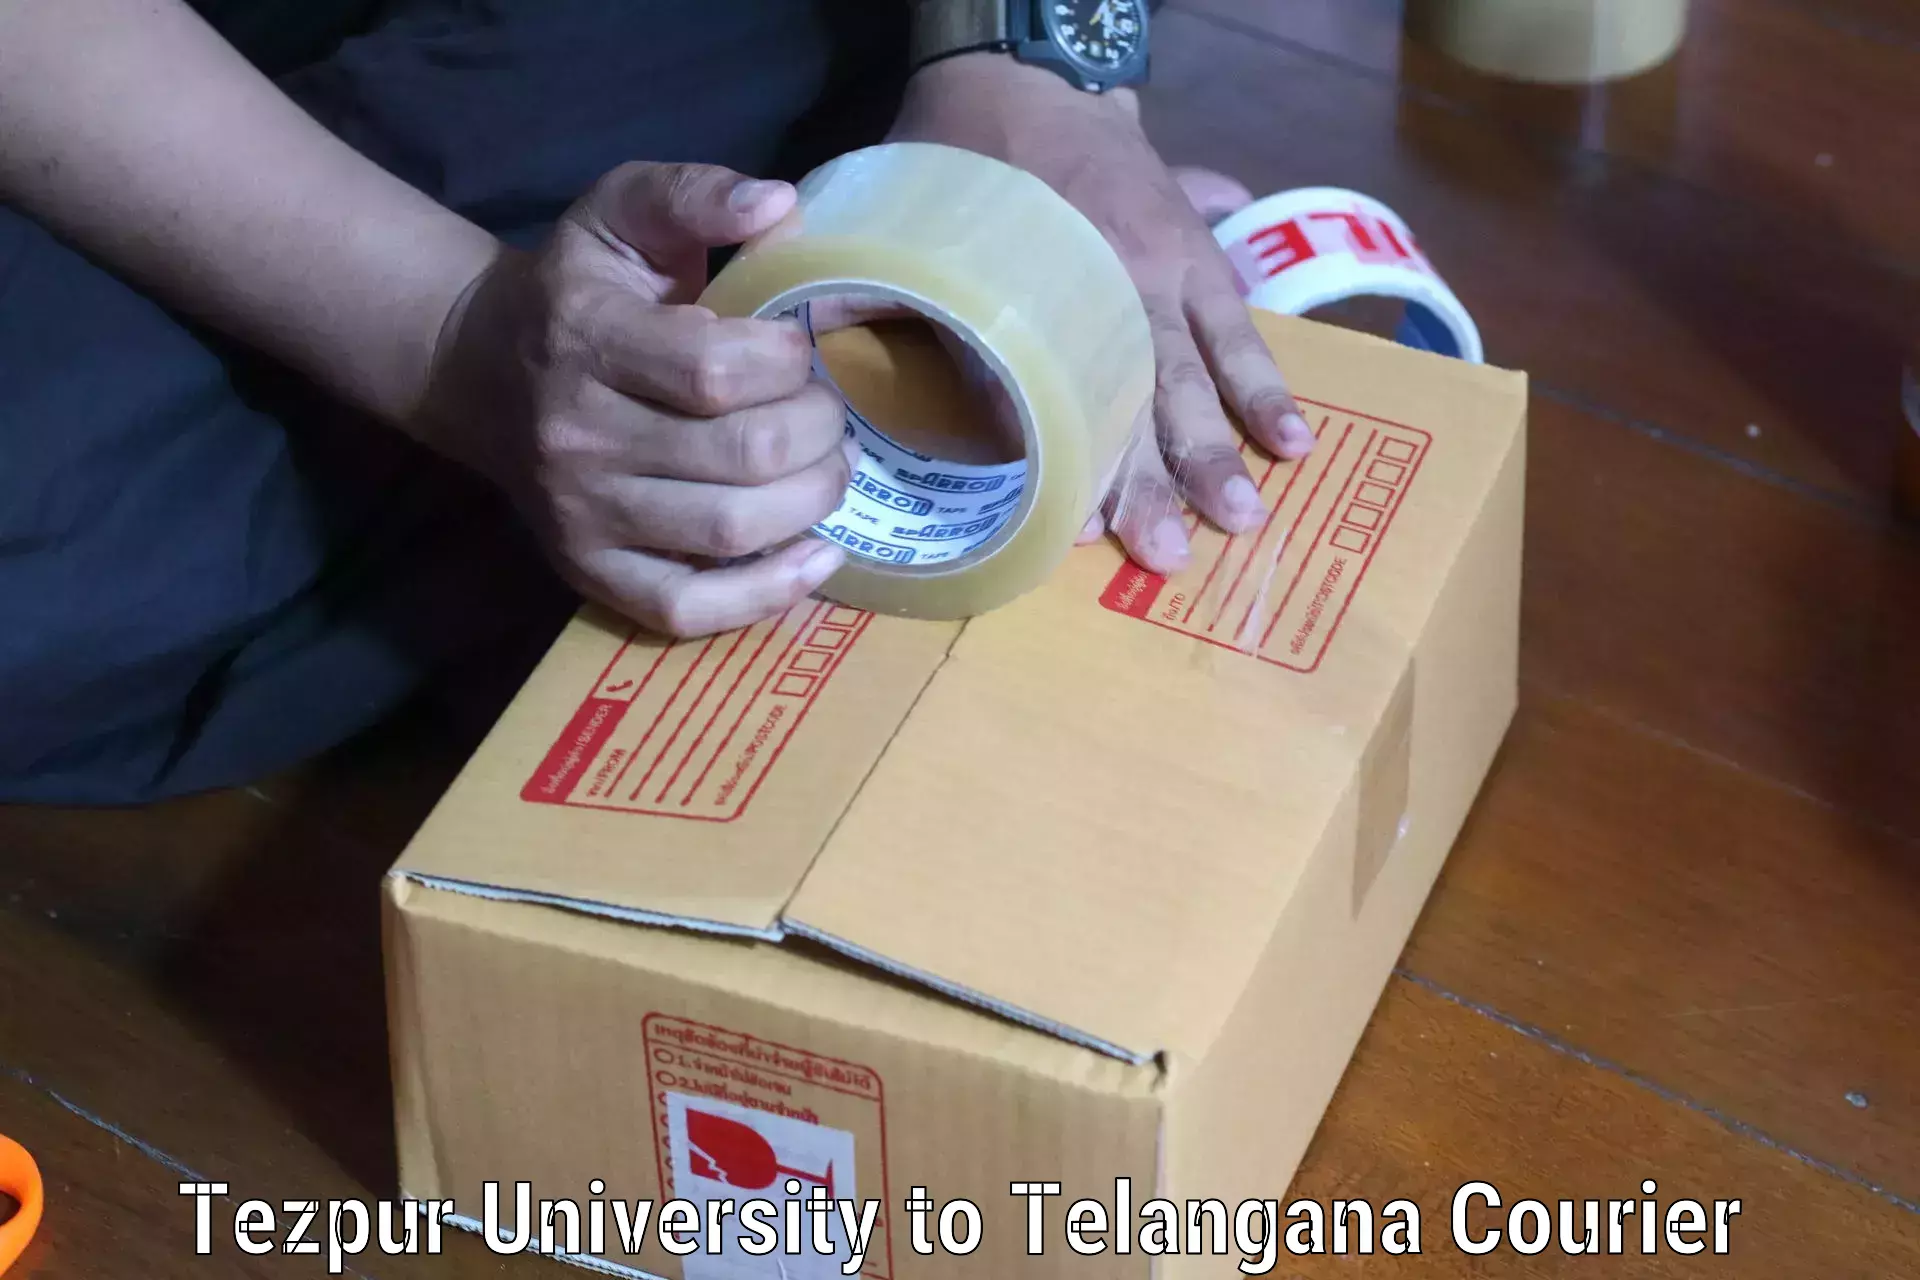 Nationwide shipping services Tezpur University to Gollapalli